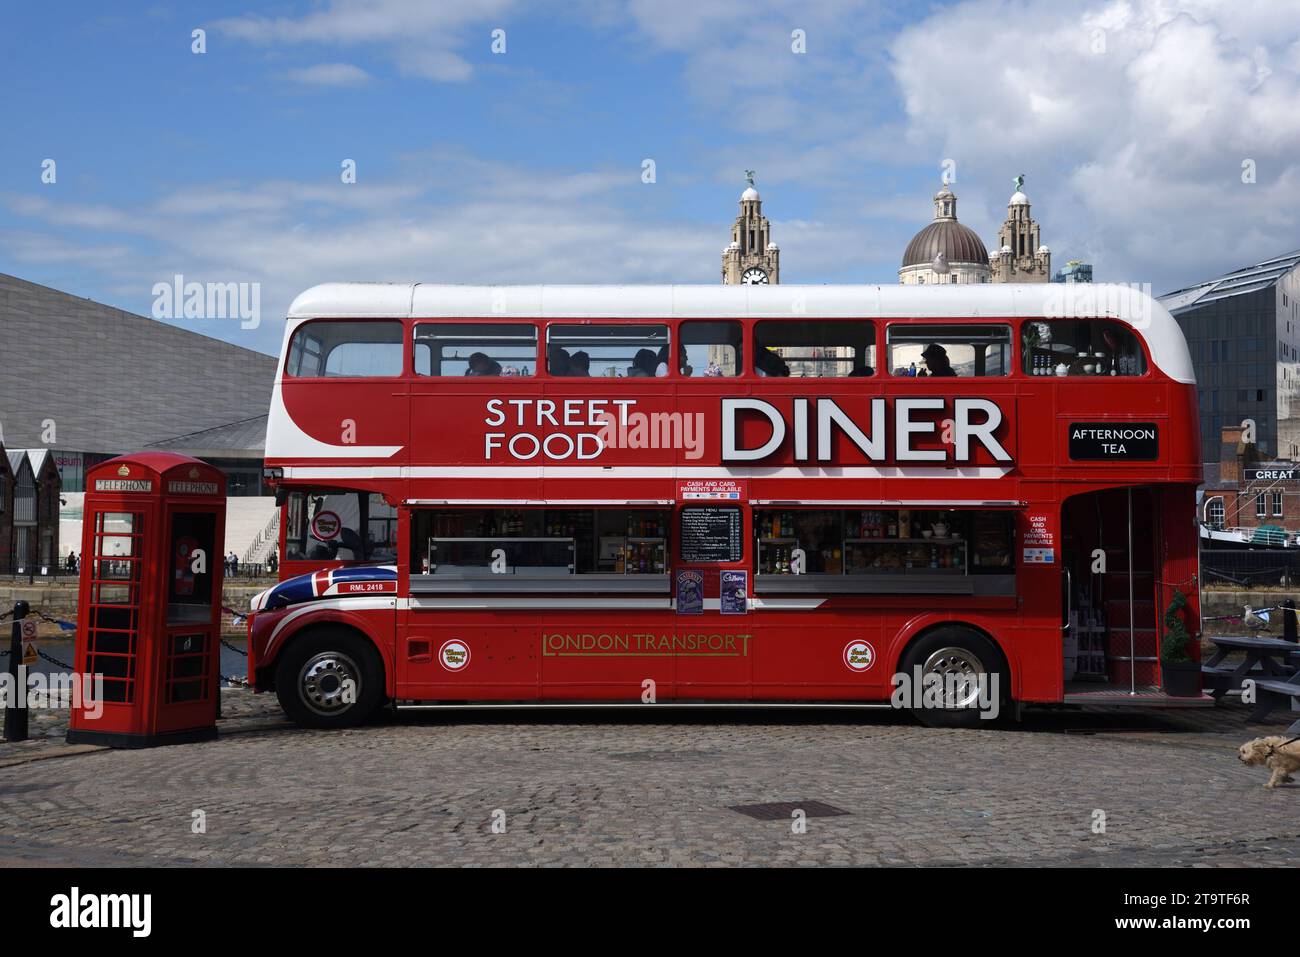 British Symbols of Red Double-Decker Bus, Converted to Street Food Diner, and Red K6 Telephone Box England UK Stock Photo